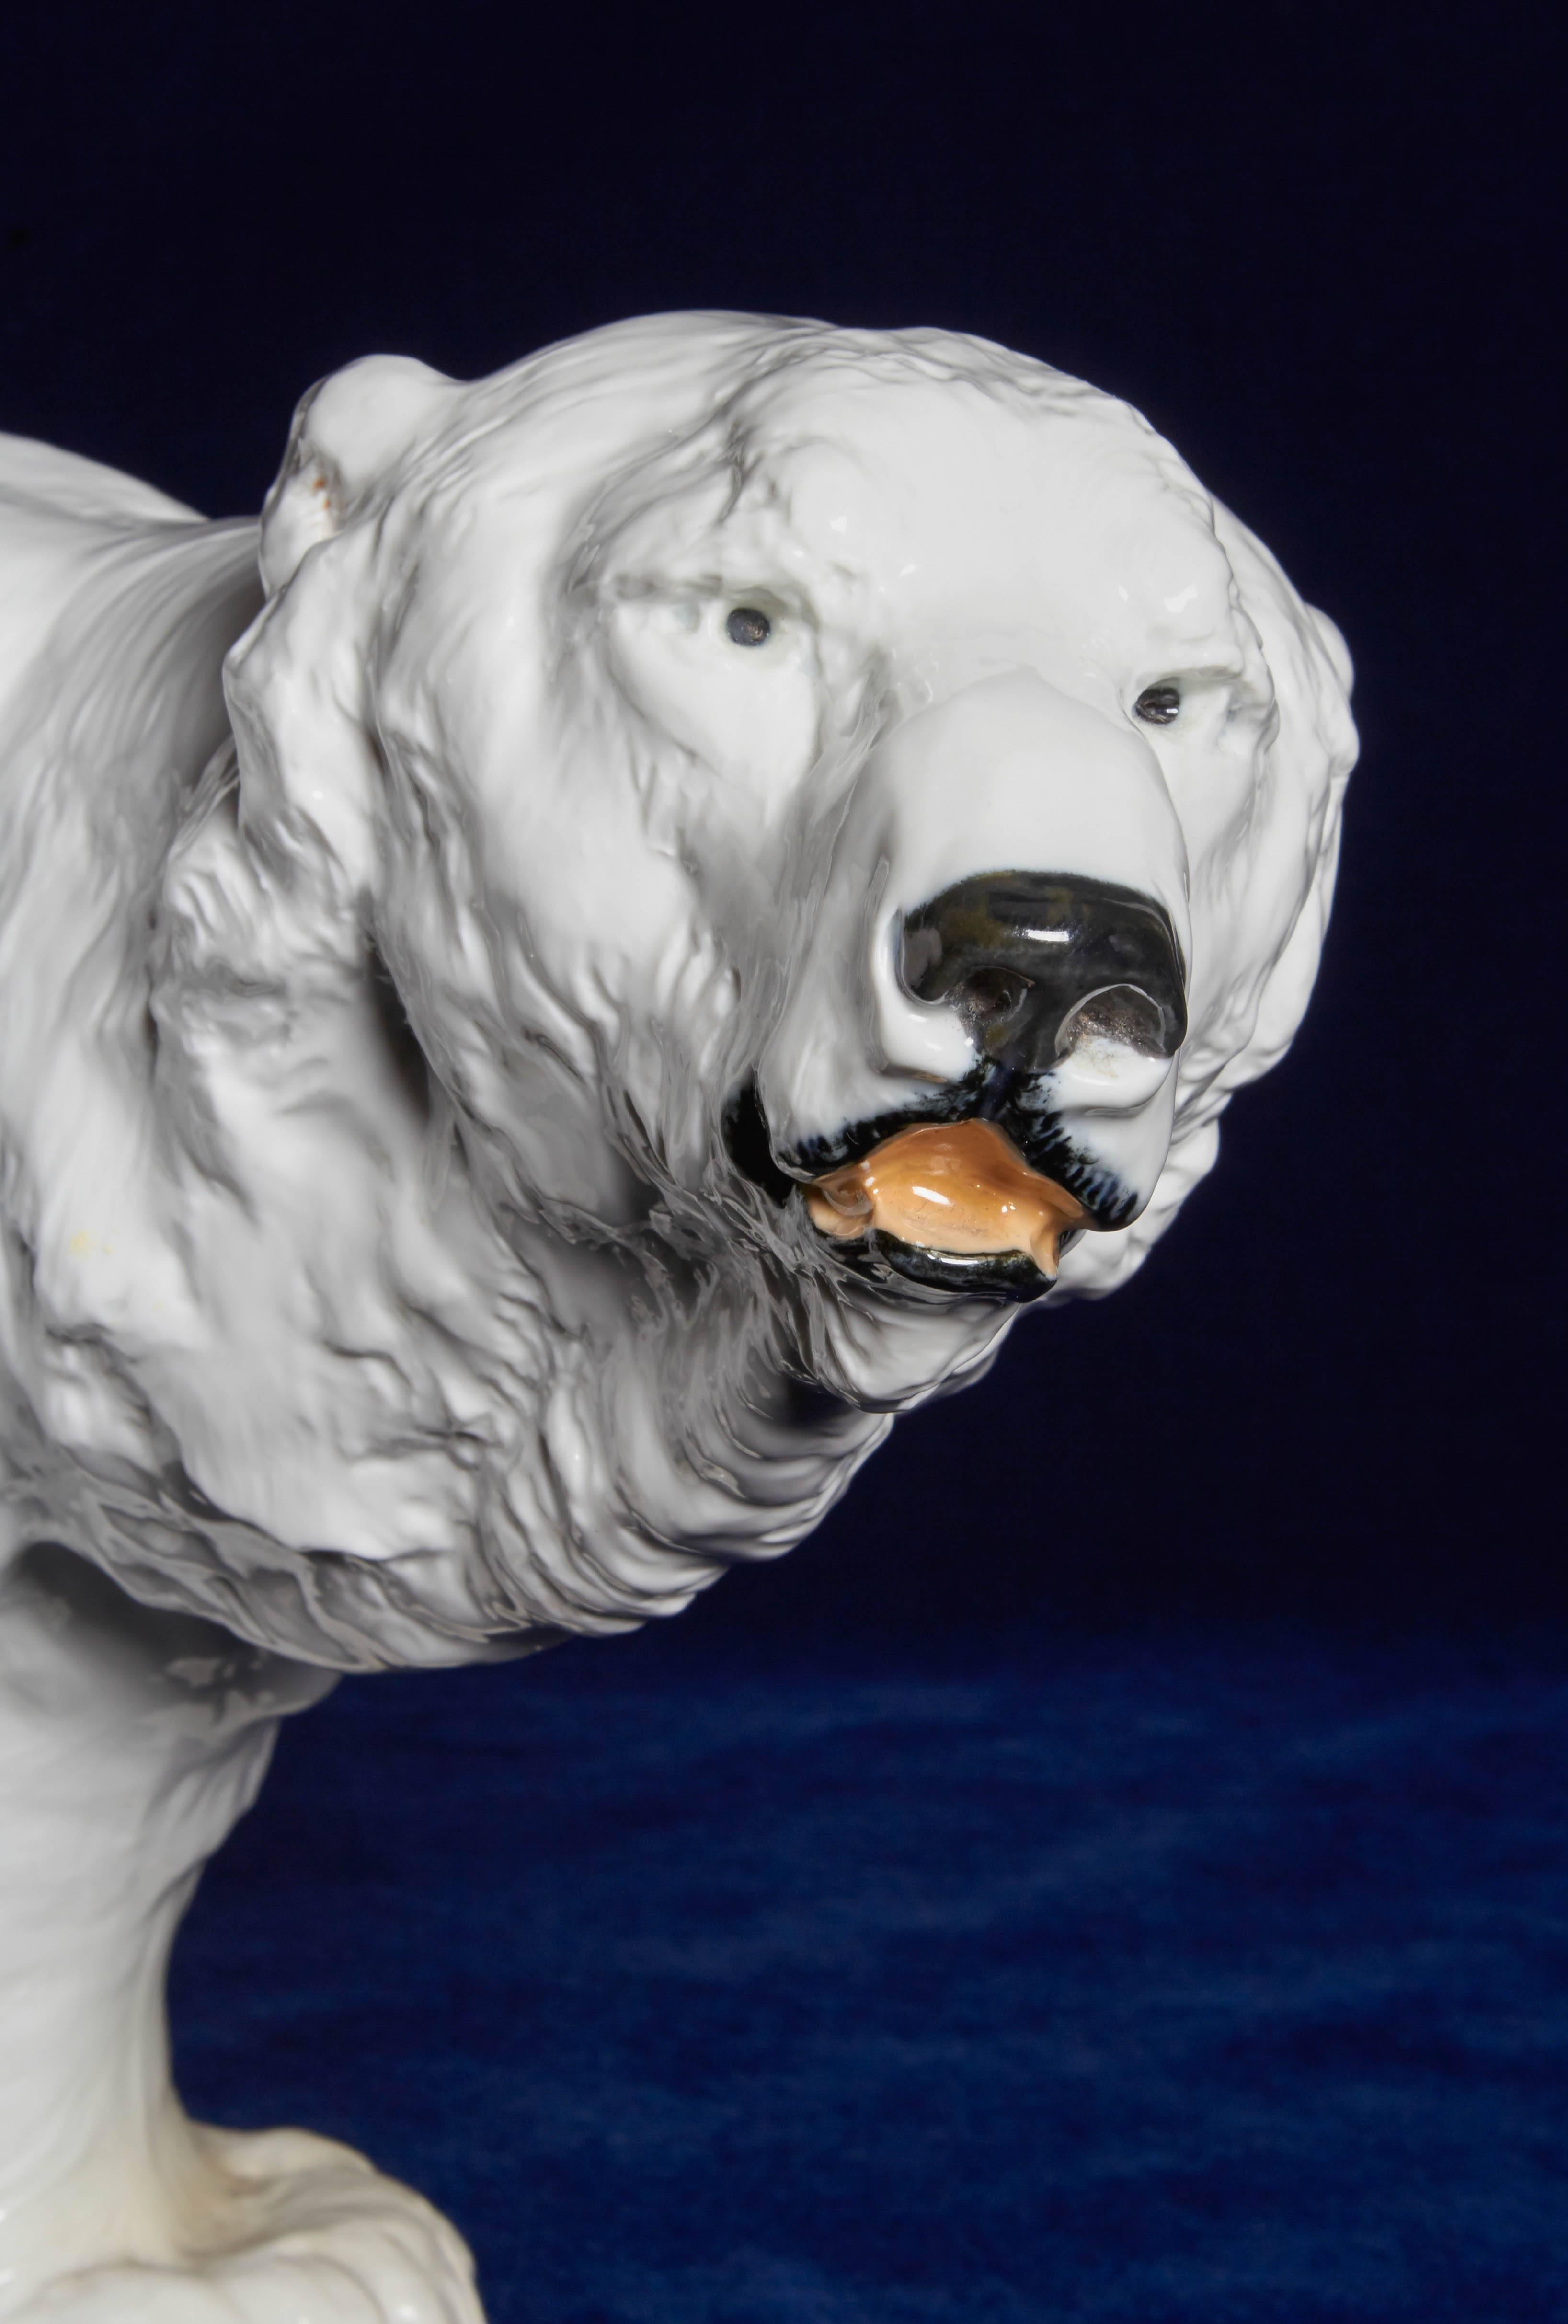 Early 20th Century Large Art Deco Meissen Porcelain Sculpture of a Polar Bear by Otto Jarl